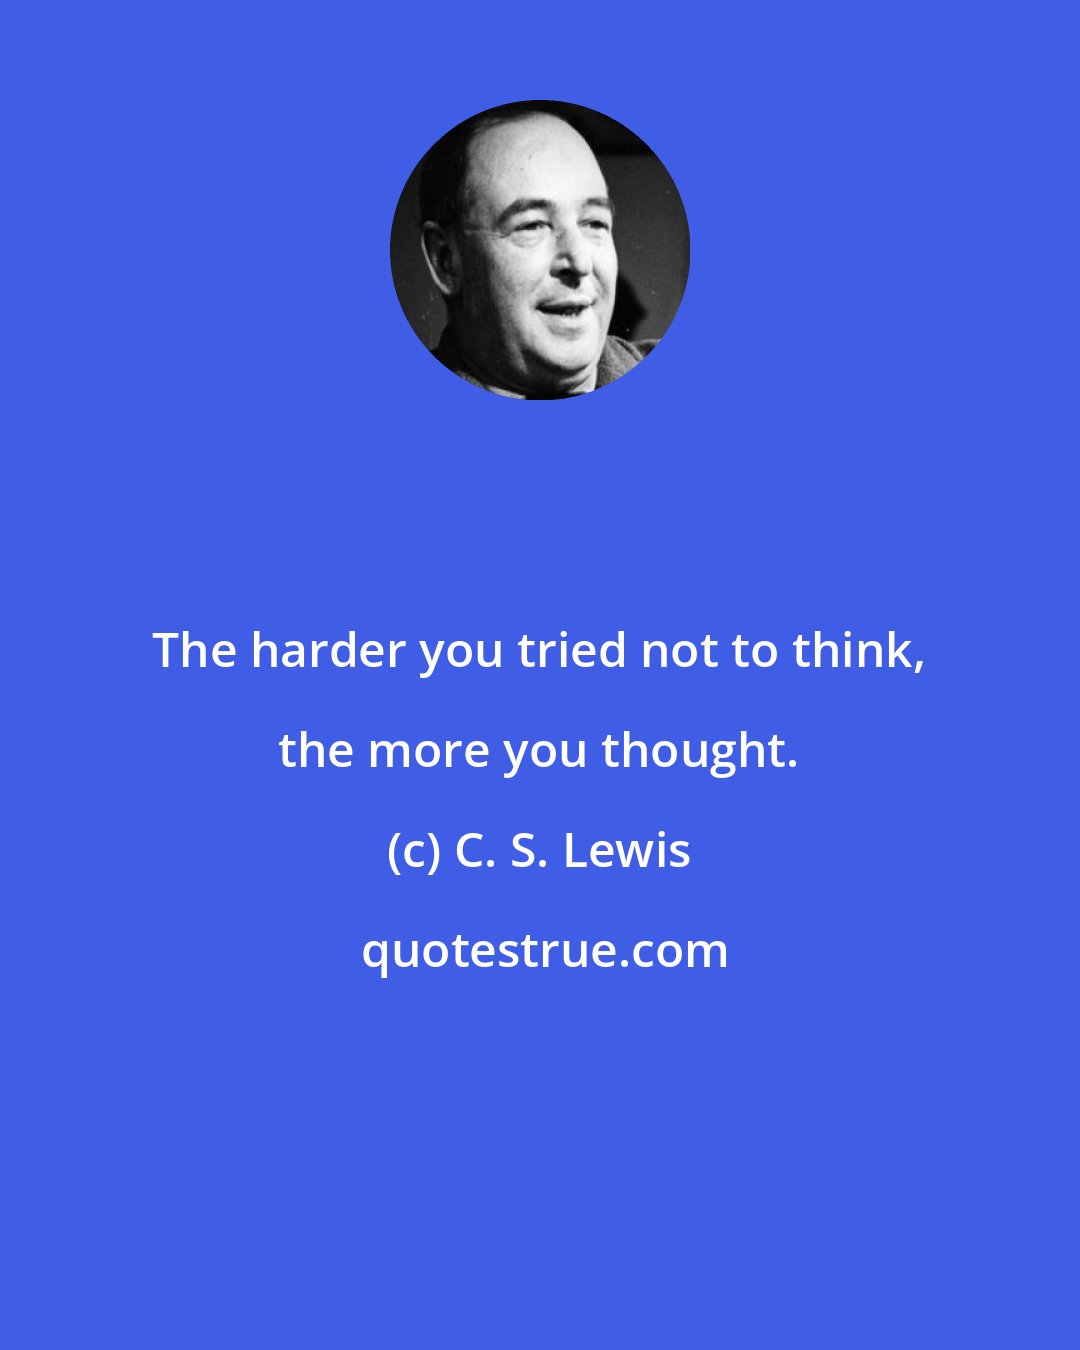 C. S. Lewis: The harder you tried not to think, the more you thought.